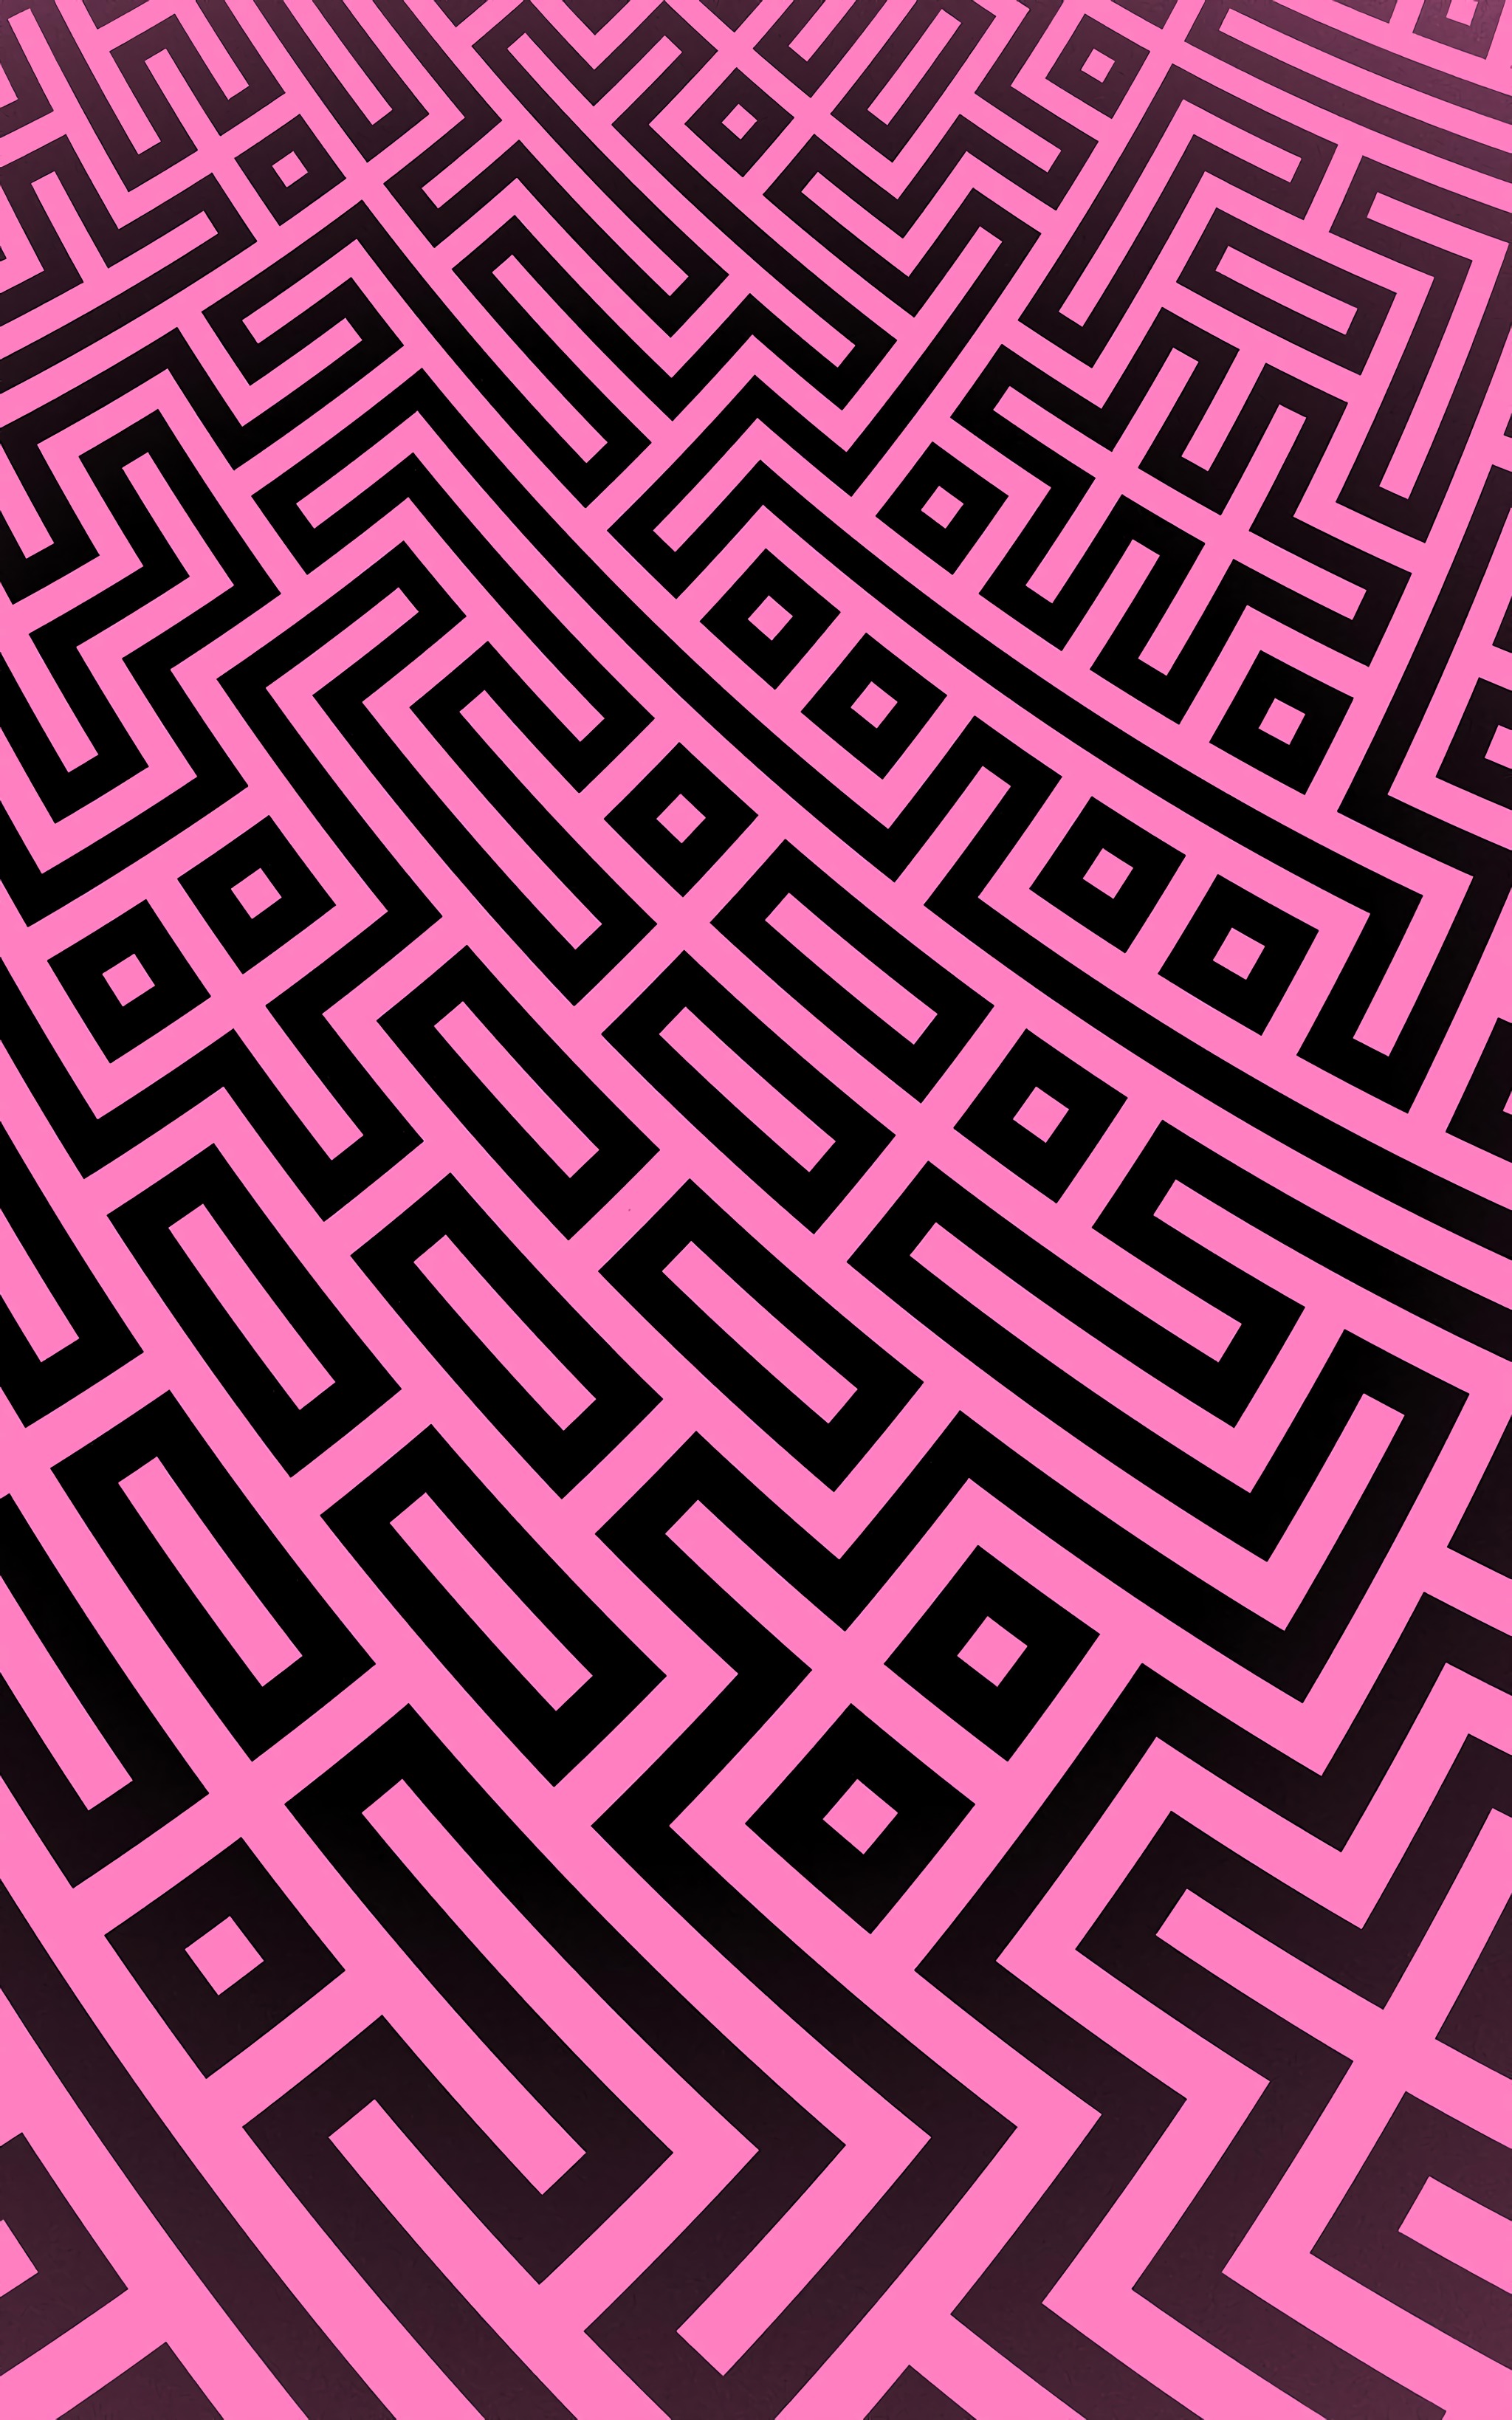 geometric, lines, pink, pattern, black, texture, textures lock screen backgrounds